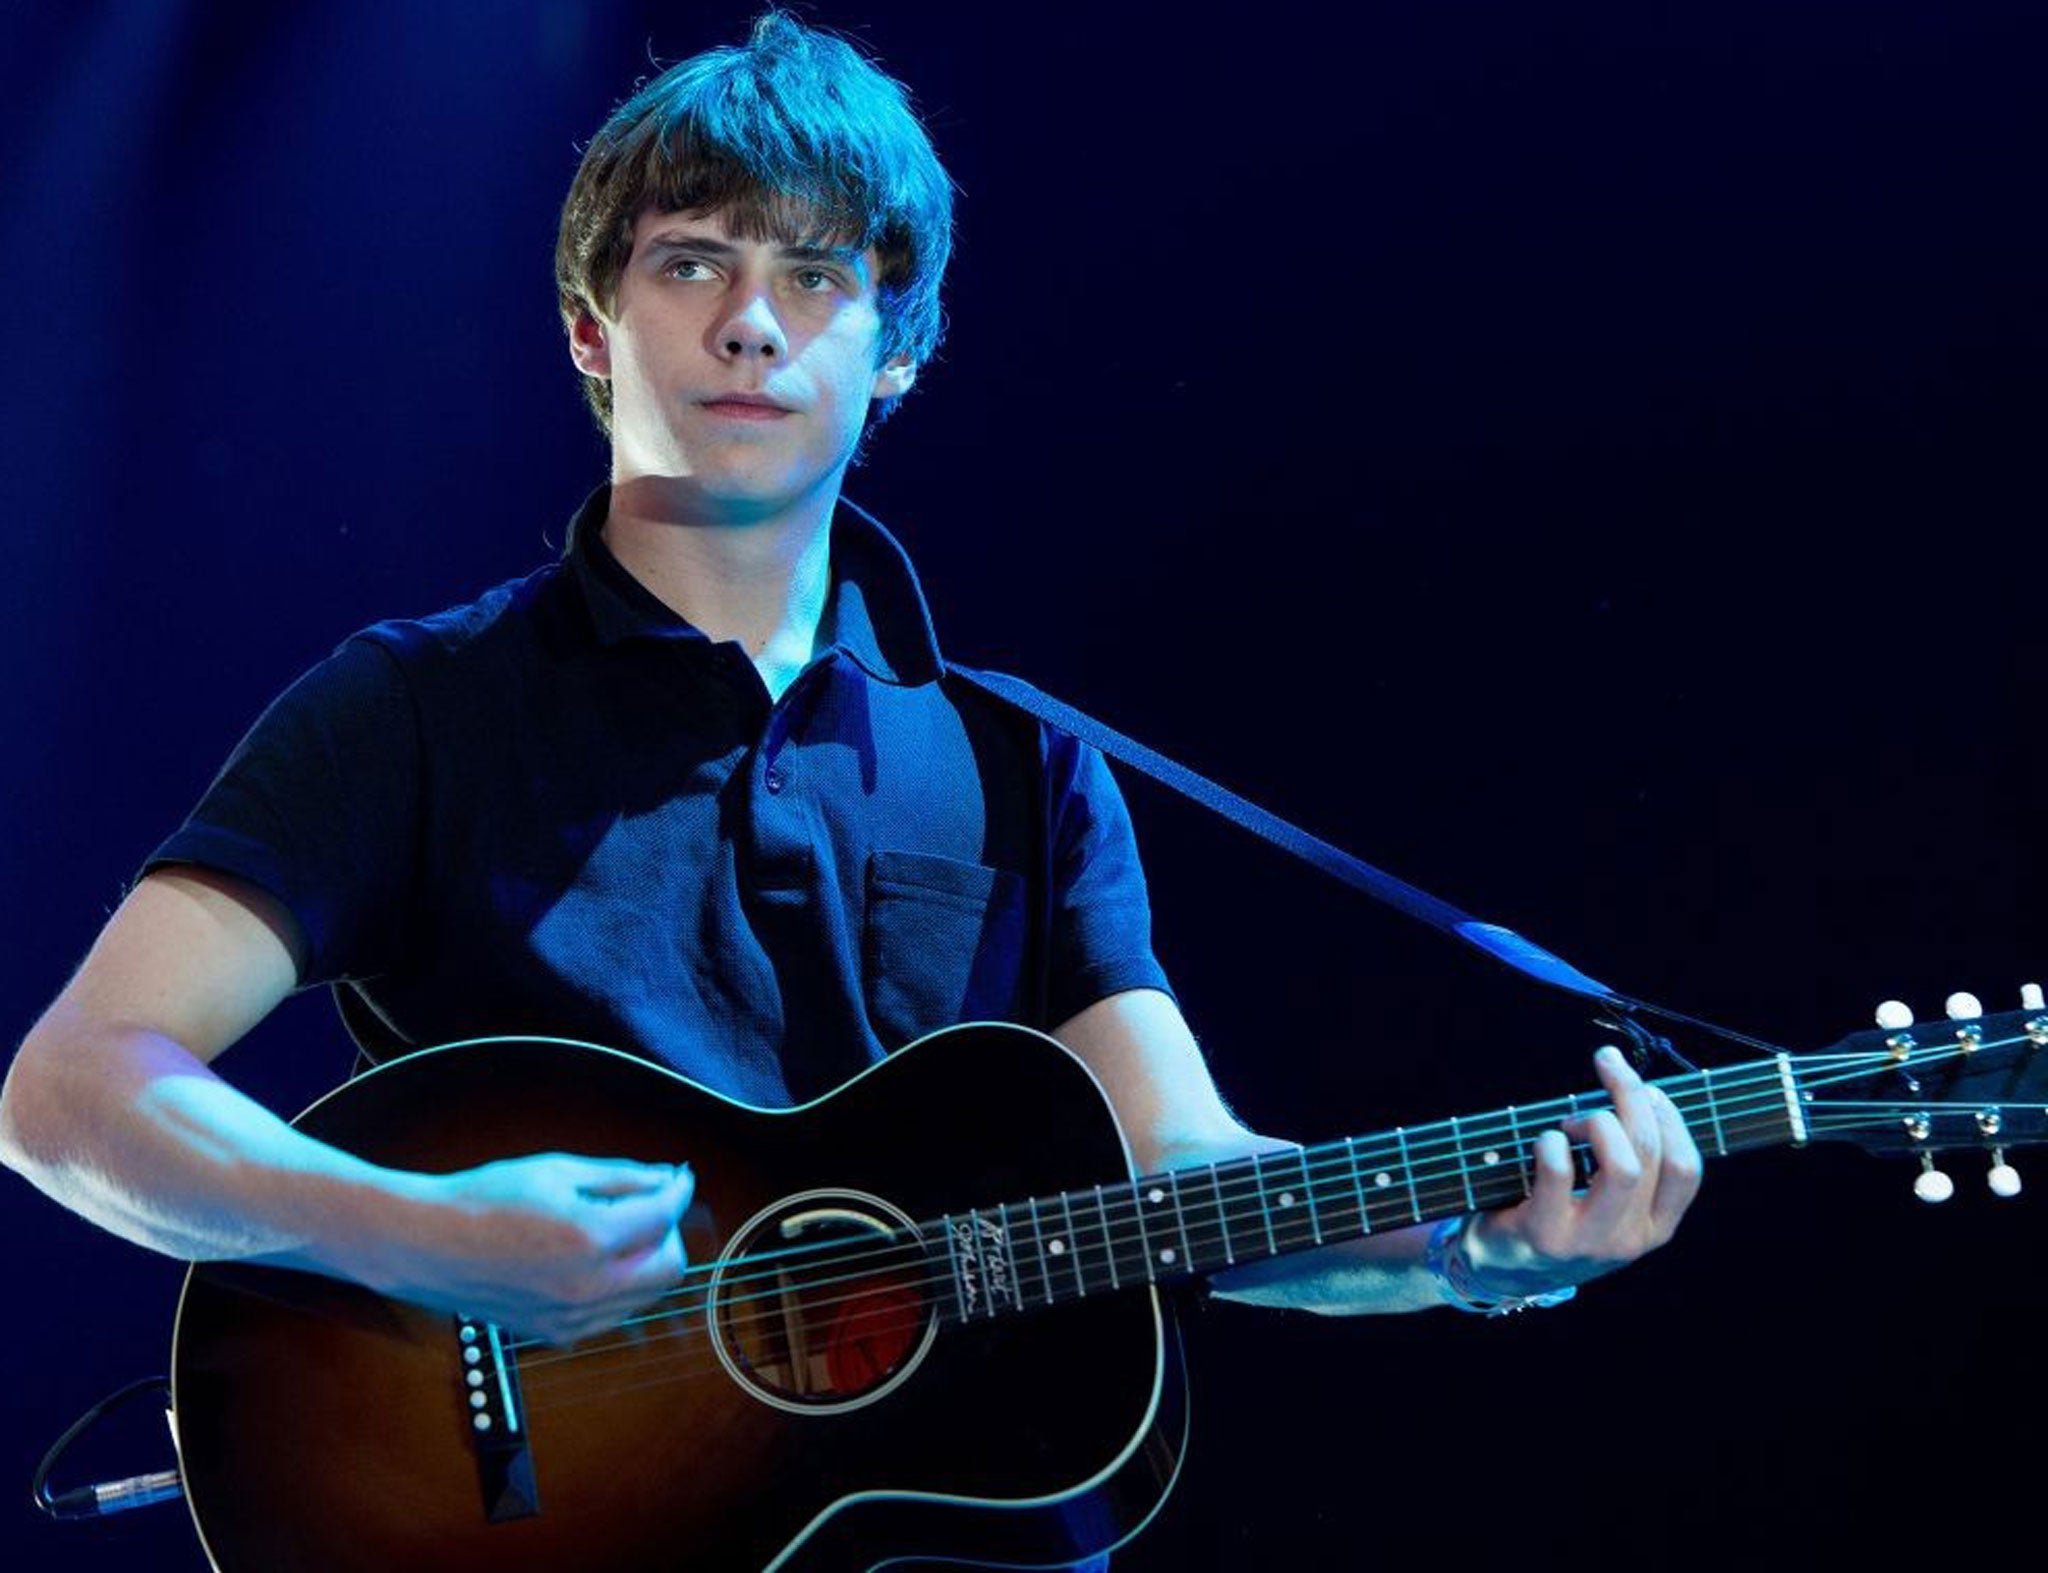 Jake Bugg says that his new material for his next album is 'darker' than anything he has produced before